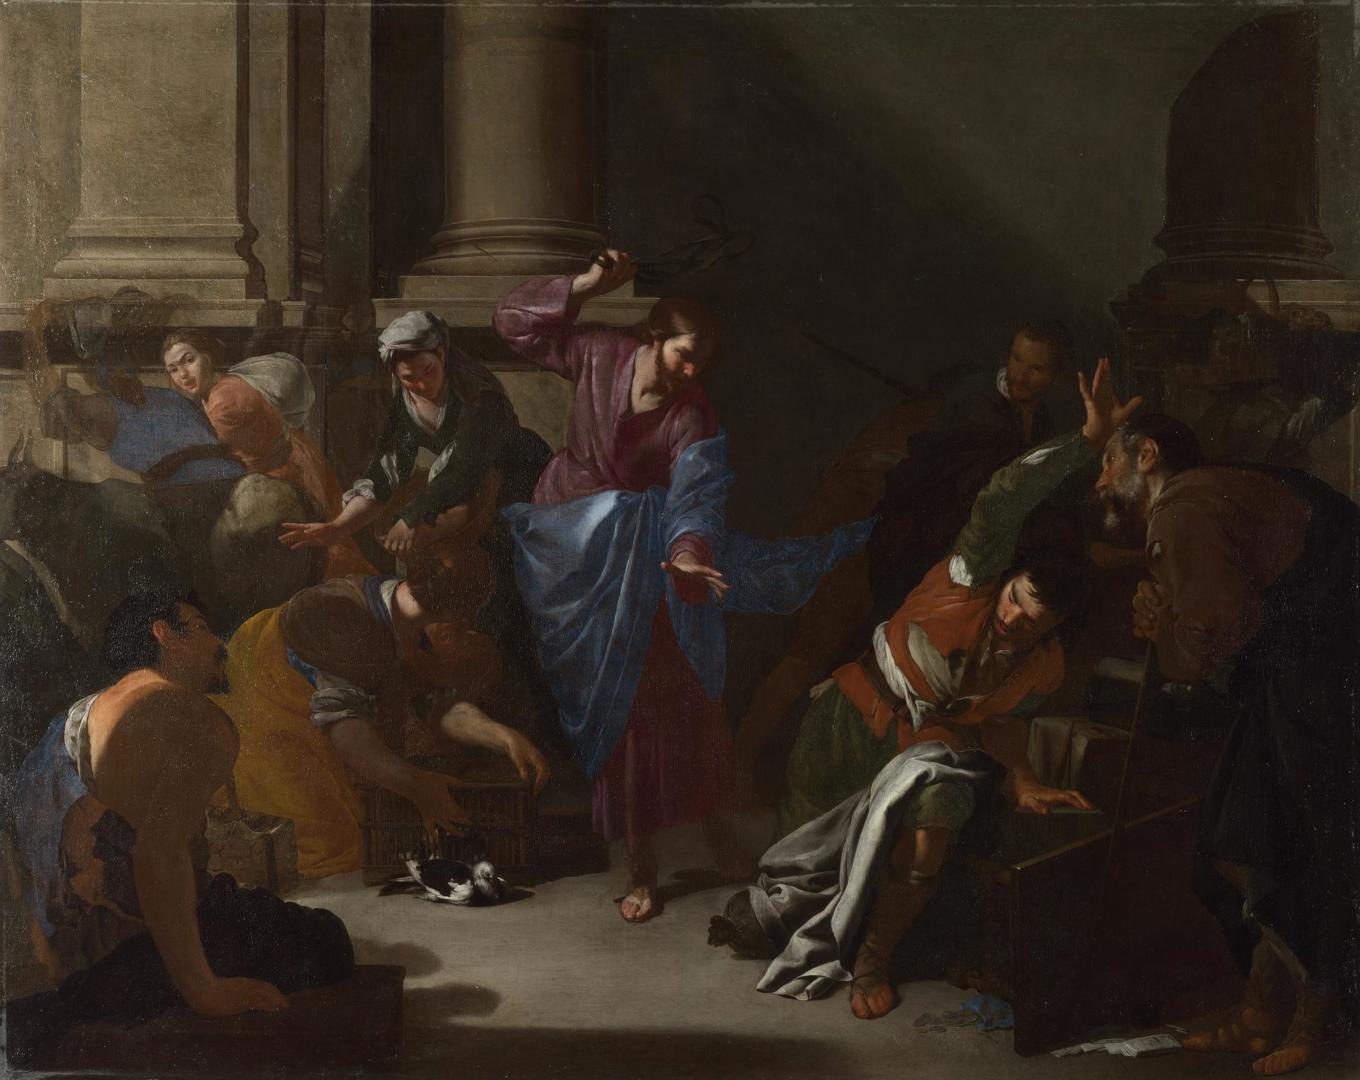 Christ driving the Traders from the Temple by Bernardo Cavallino